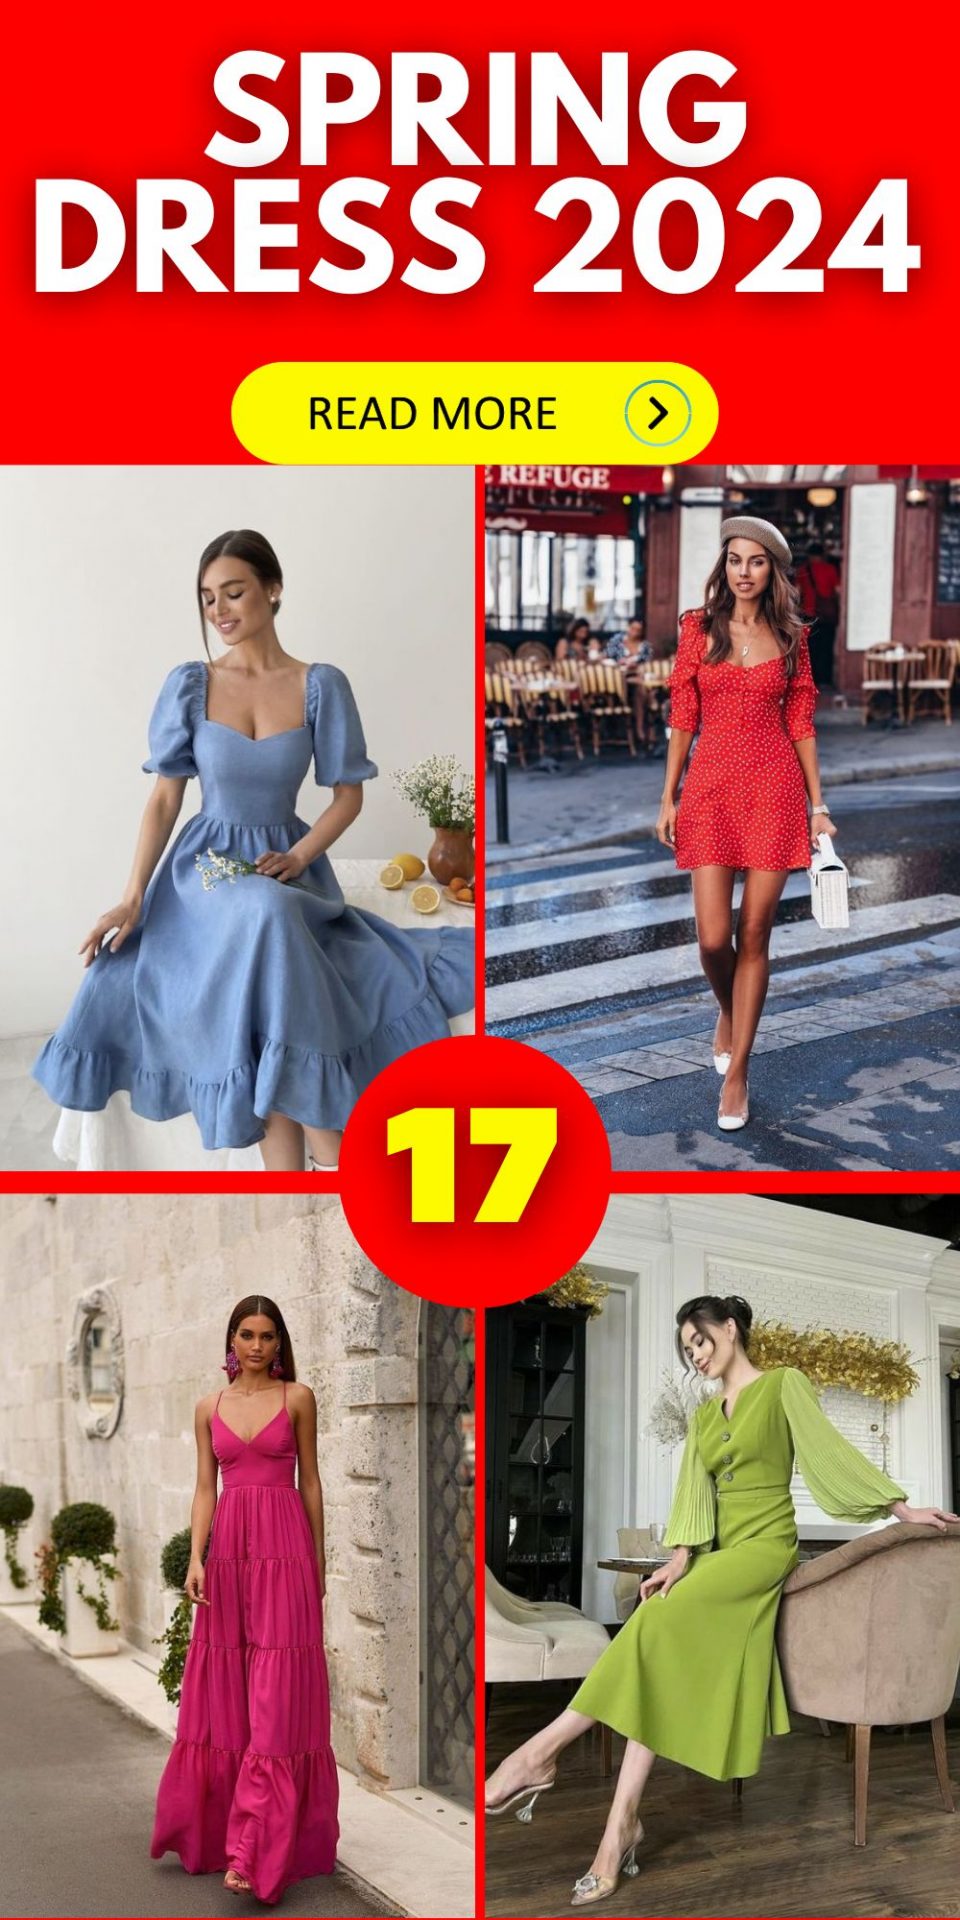 Explore Spring Dress 2024 Trends From Casual Chic to Formal Elegance